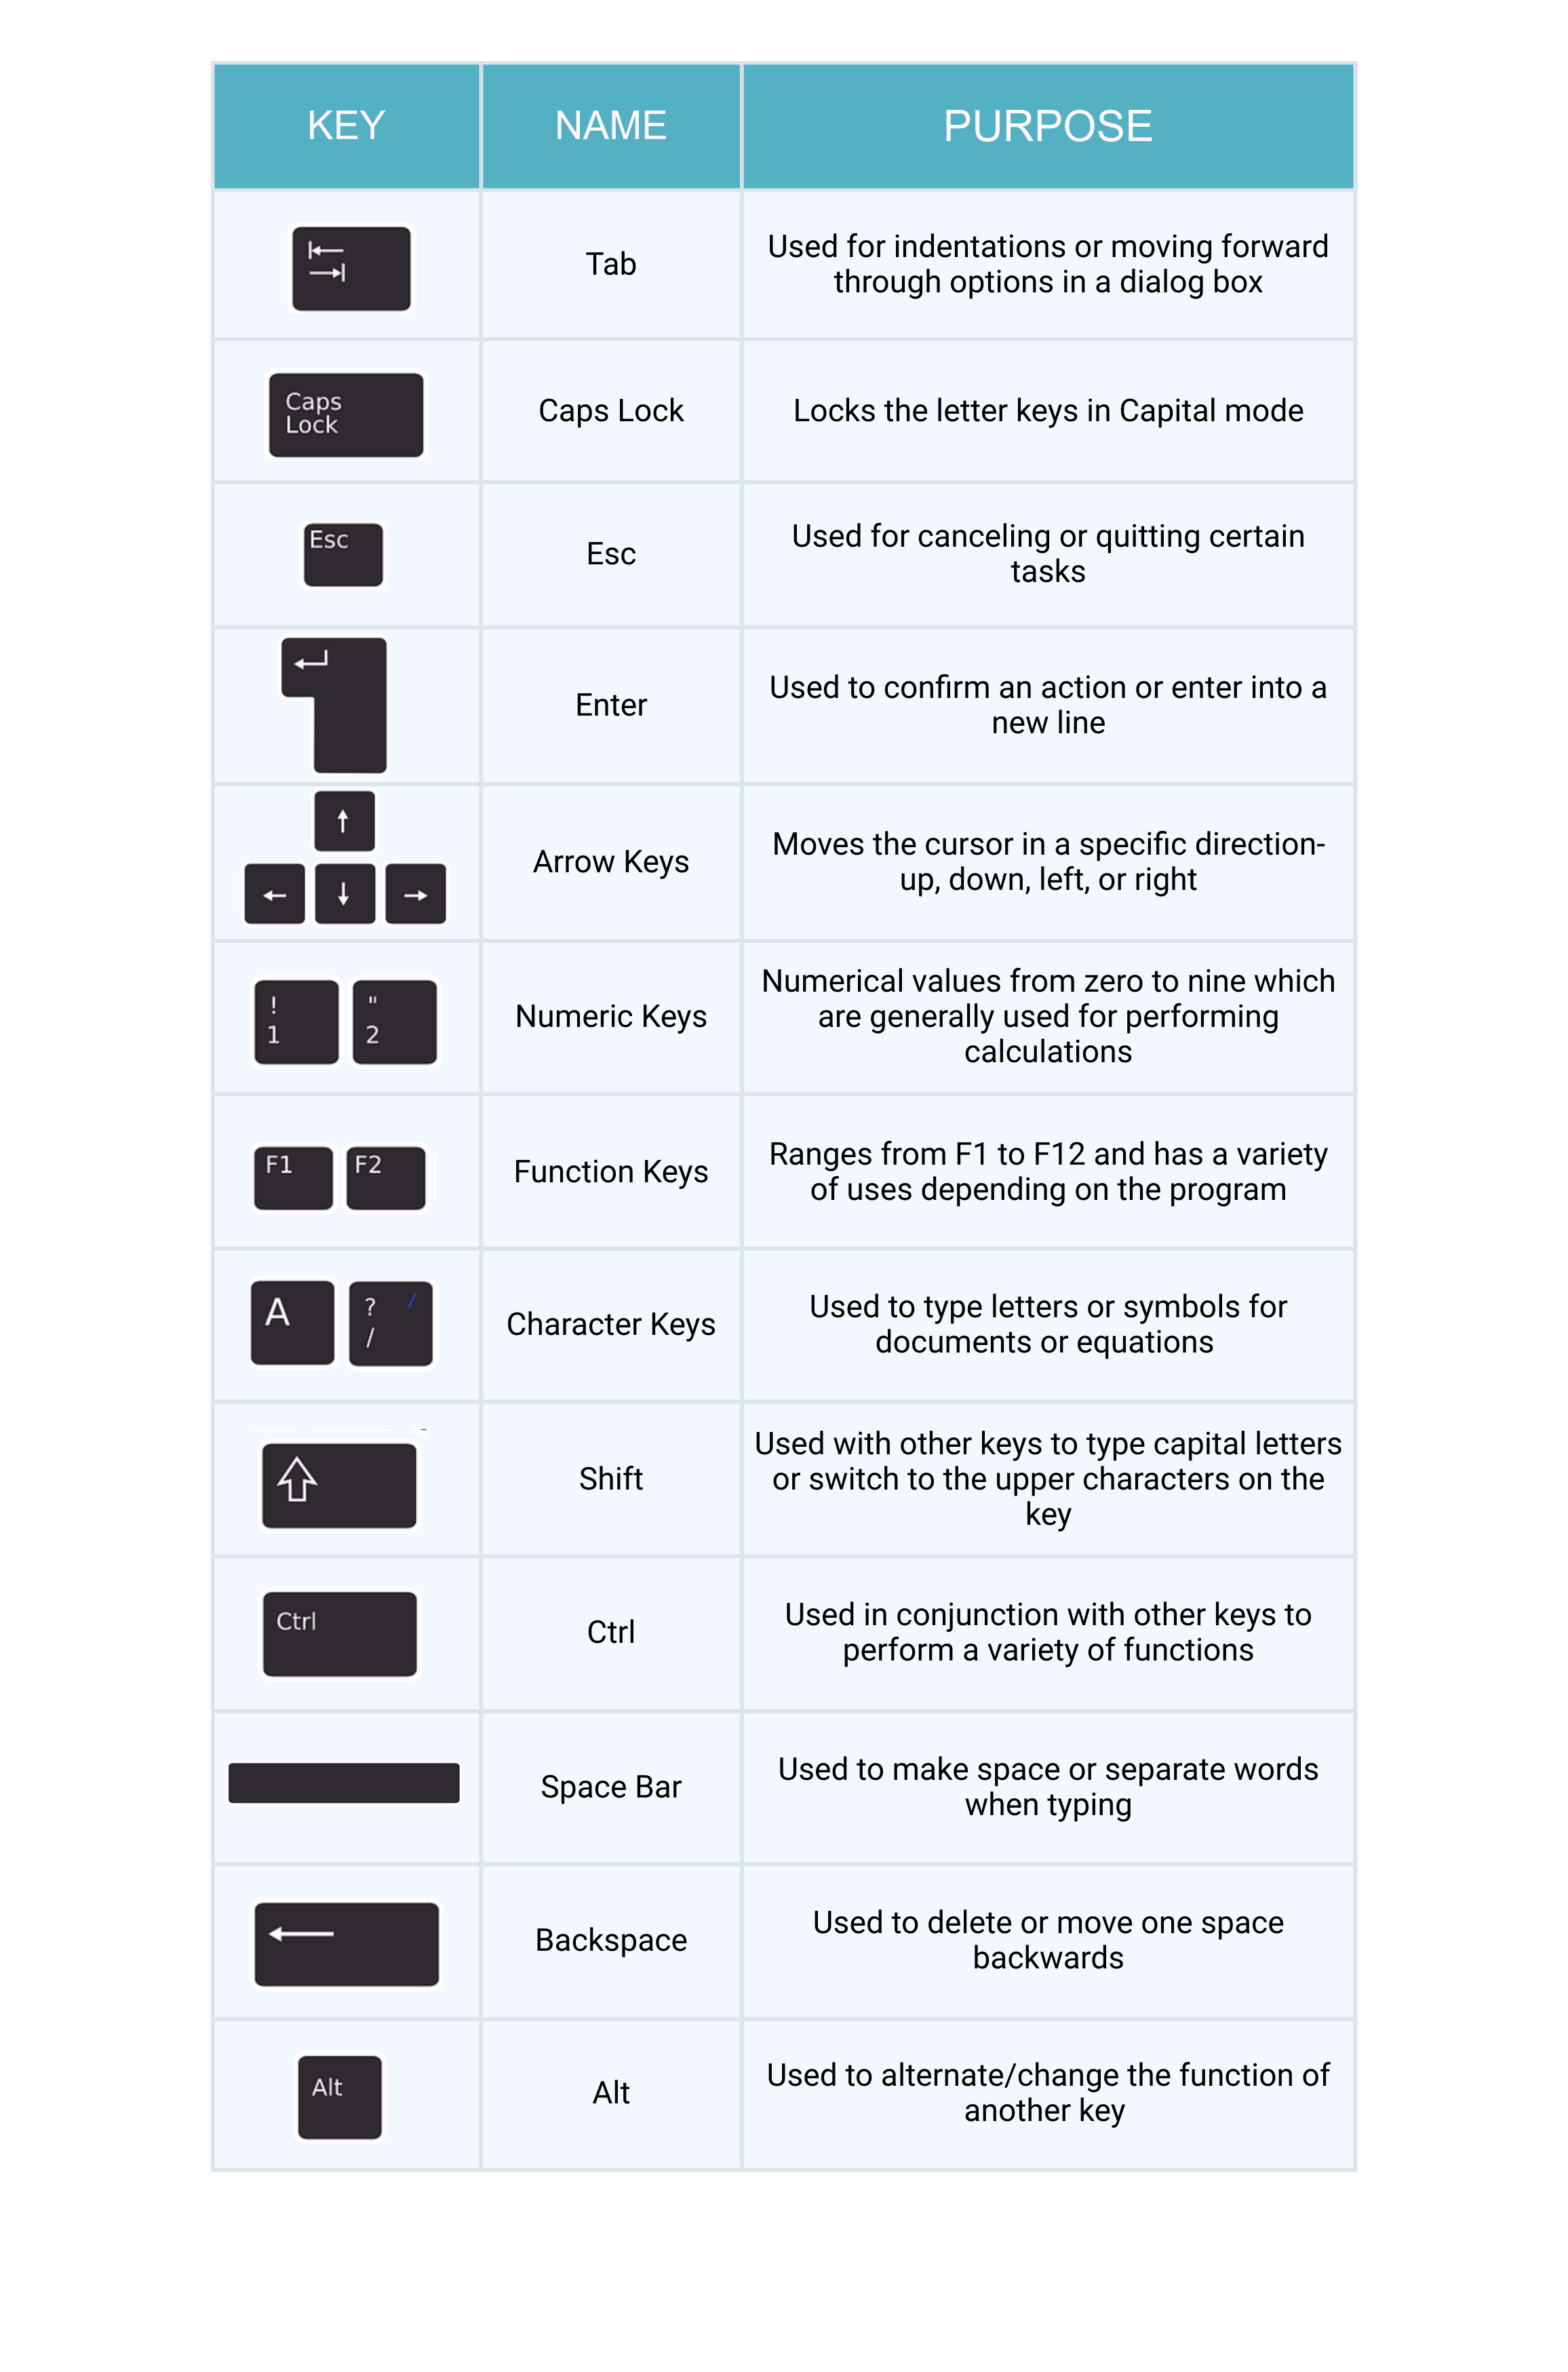 Infographic of a keyboard showing images of the keys with the name and purpose of each keyboard key